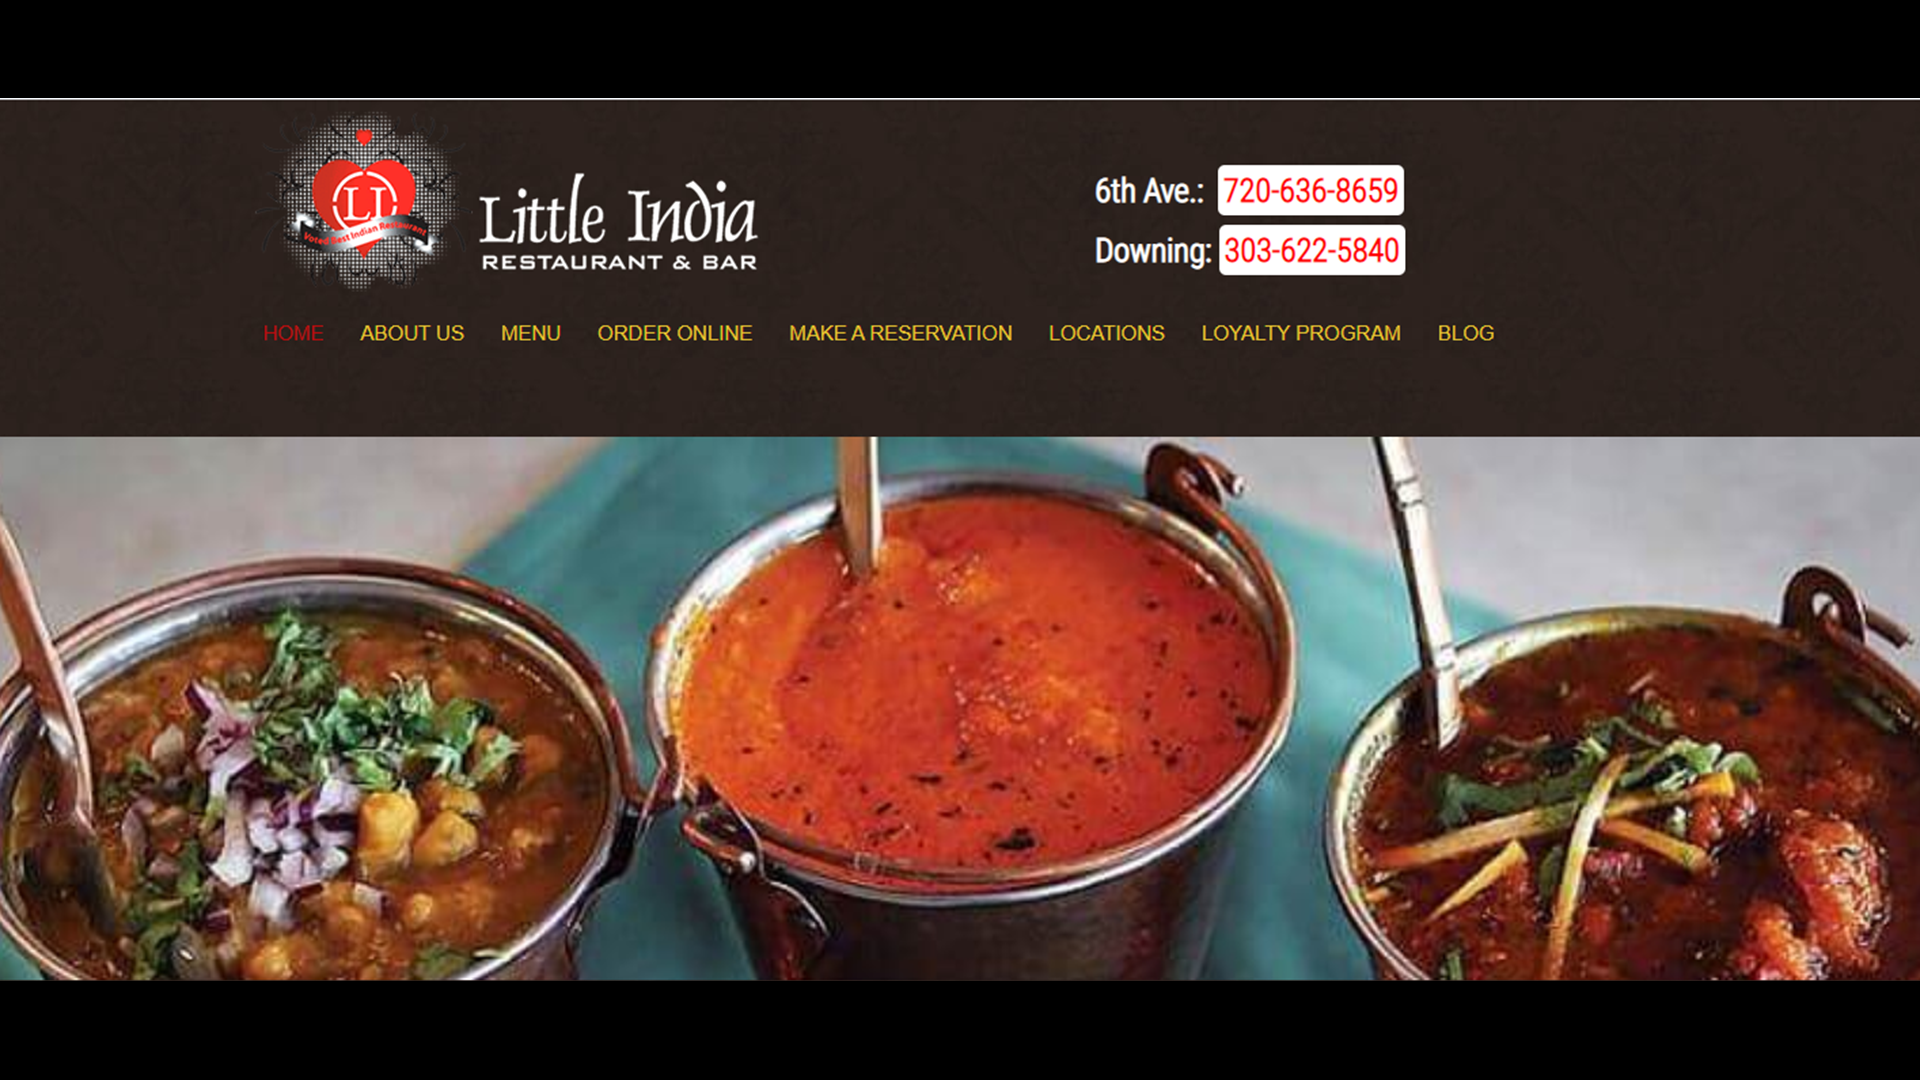 Little India has locations on 6th and Grant and on Downing. Check out LittleIndiaOfDenver.com for the menu.